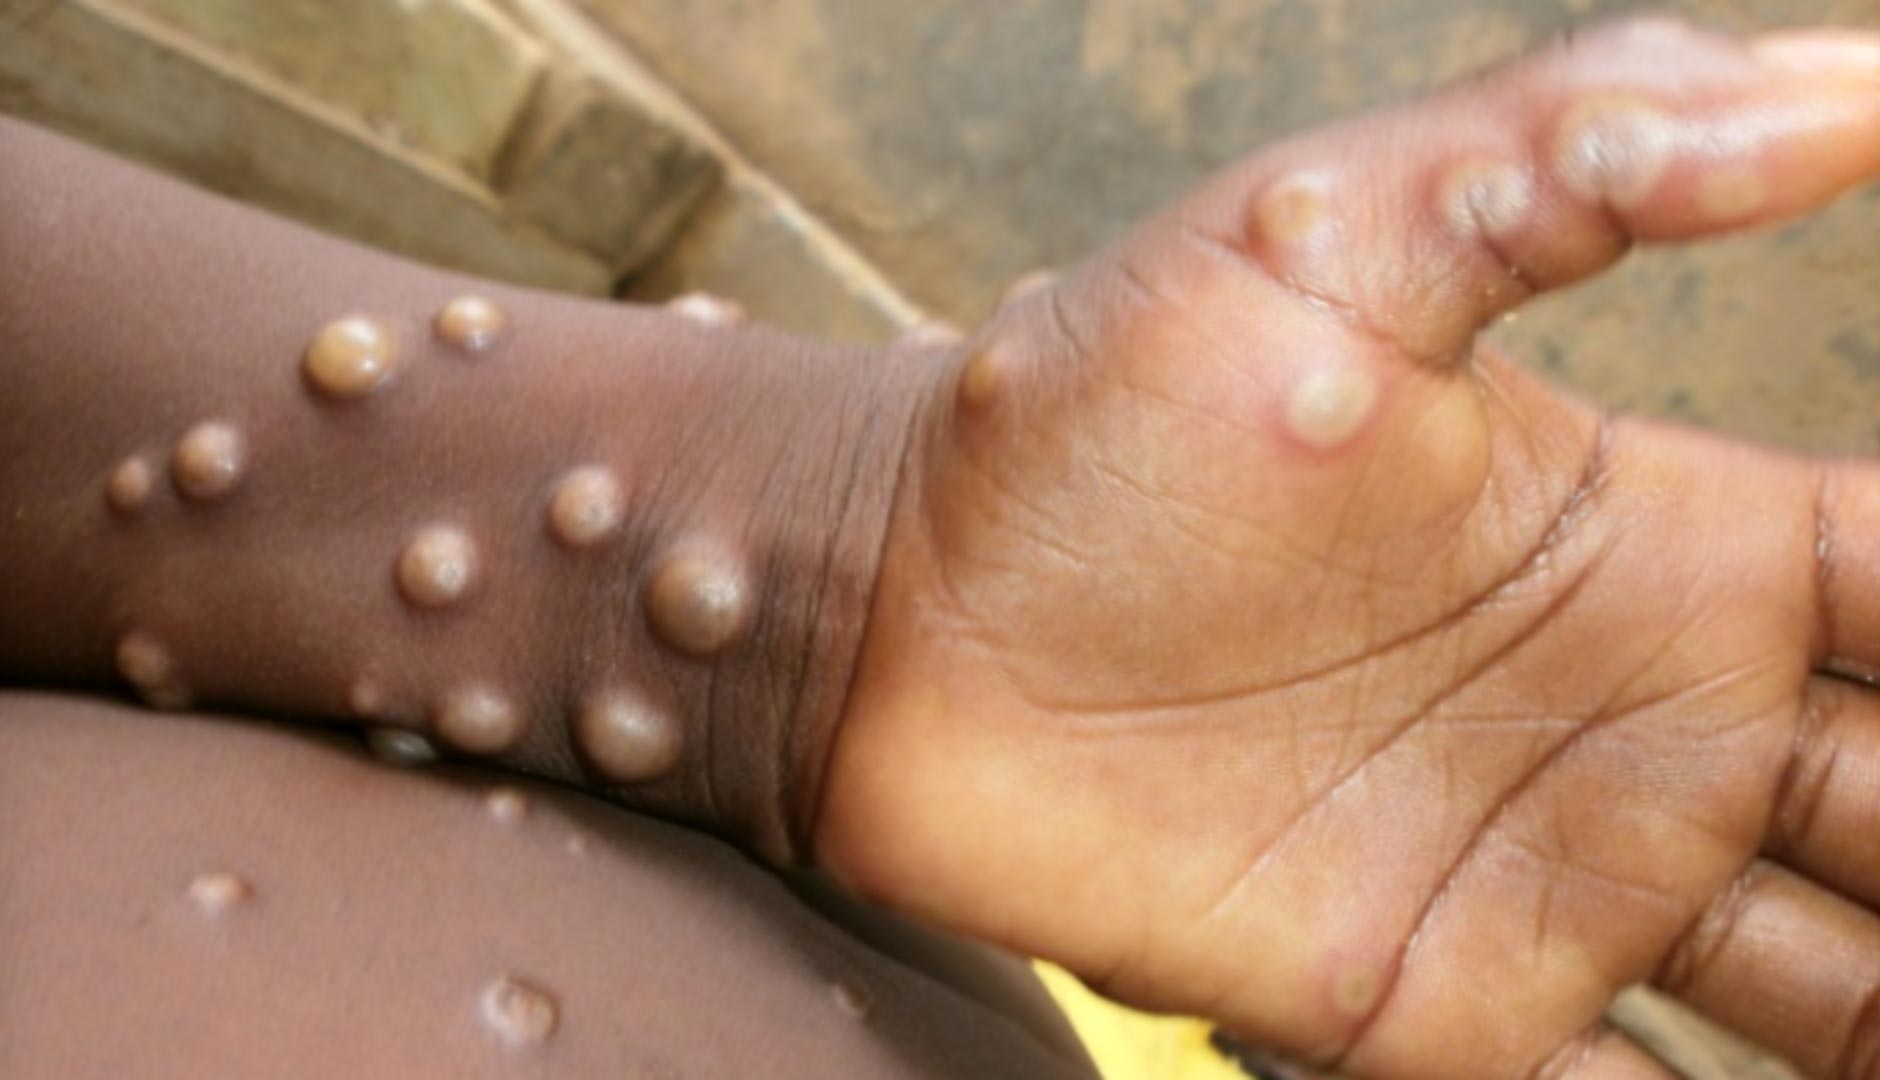 What Is Monkeypox? A Microbiologist Explains What's Known About This Disease